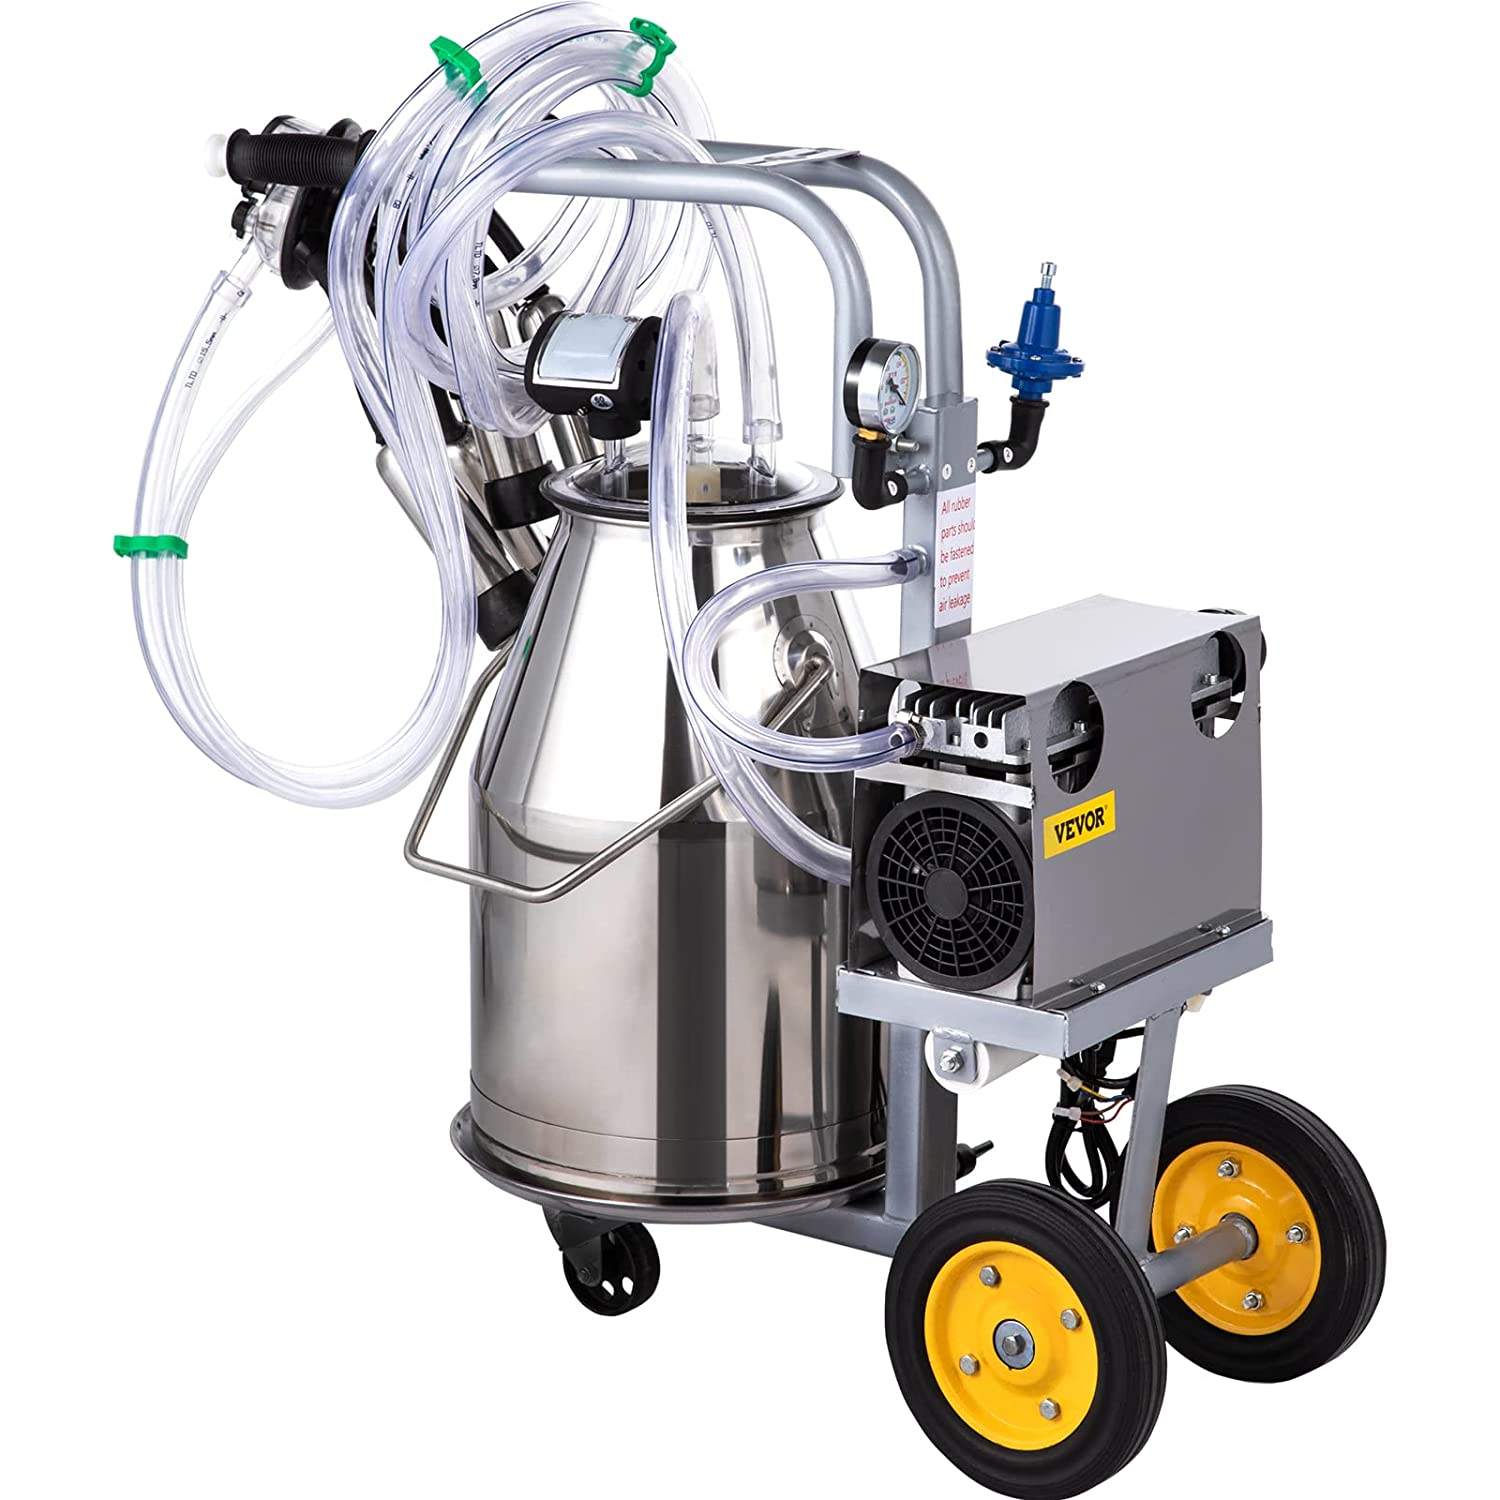 25L Electric Milking Machine I 5-8 Cows per Hour I 0.55KW 1680 RPM Milking Equipment For Cows and Goat